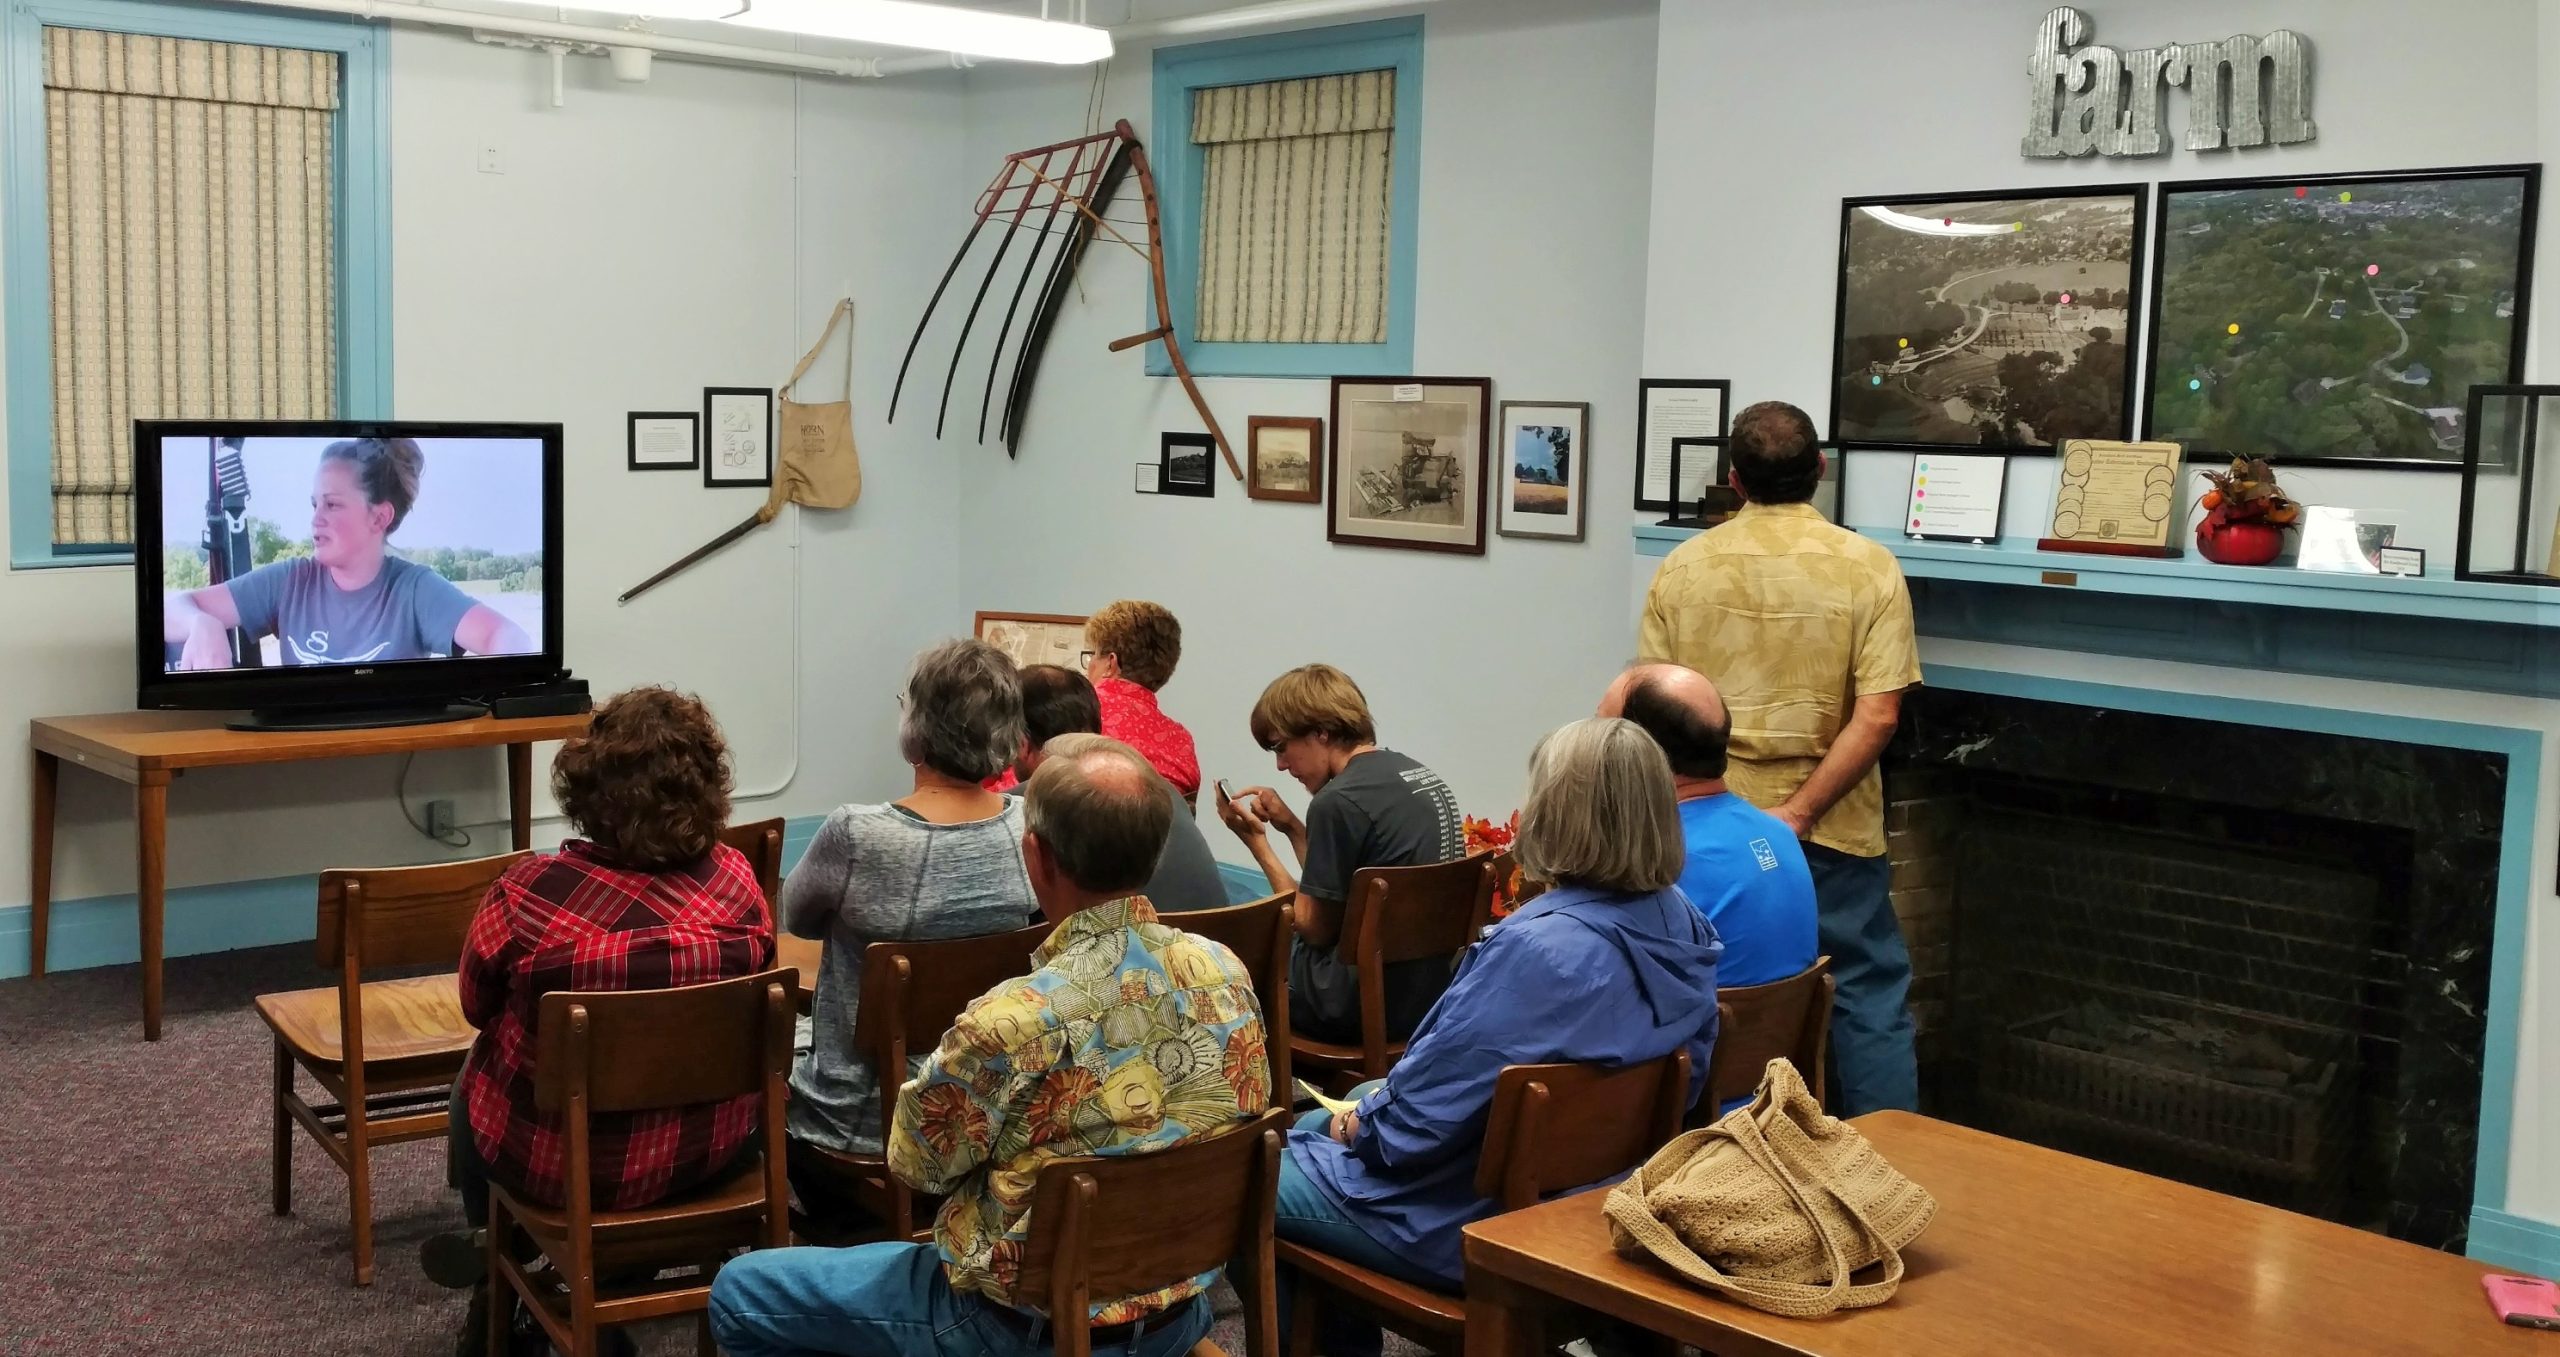 Photograph of people viewing a documentary video about local farm families, Chester Public Library.